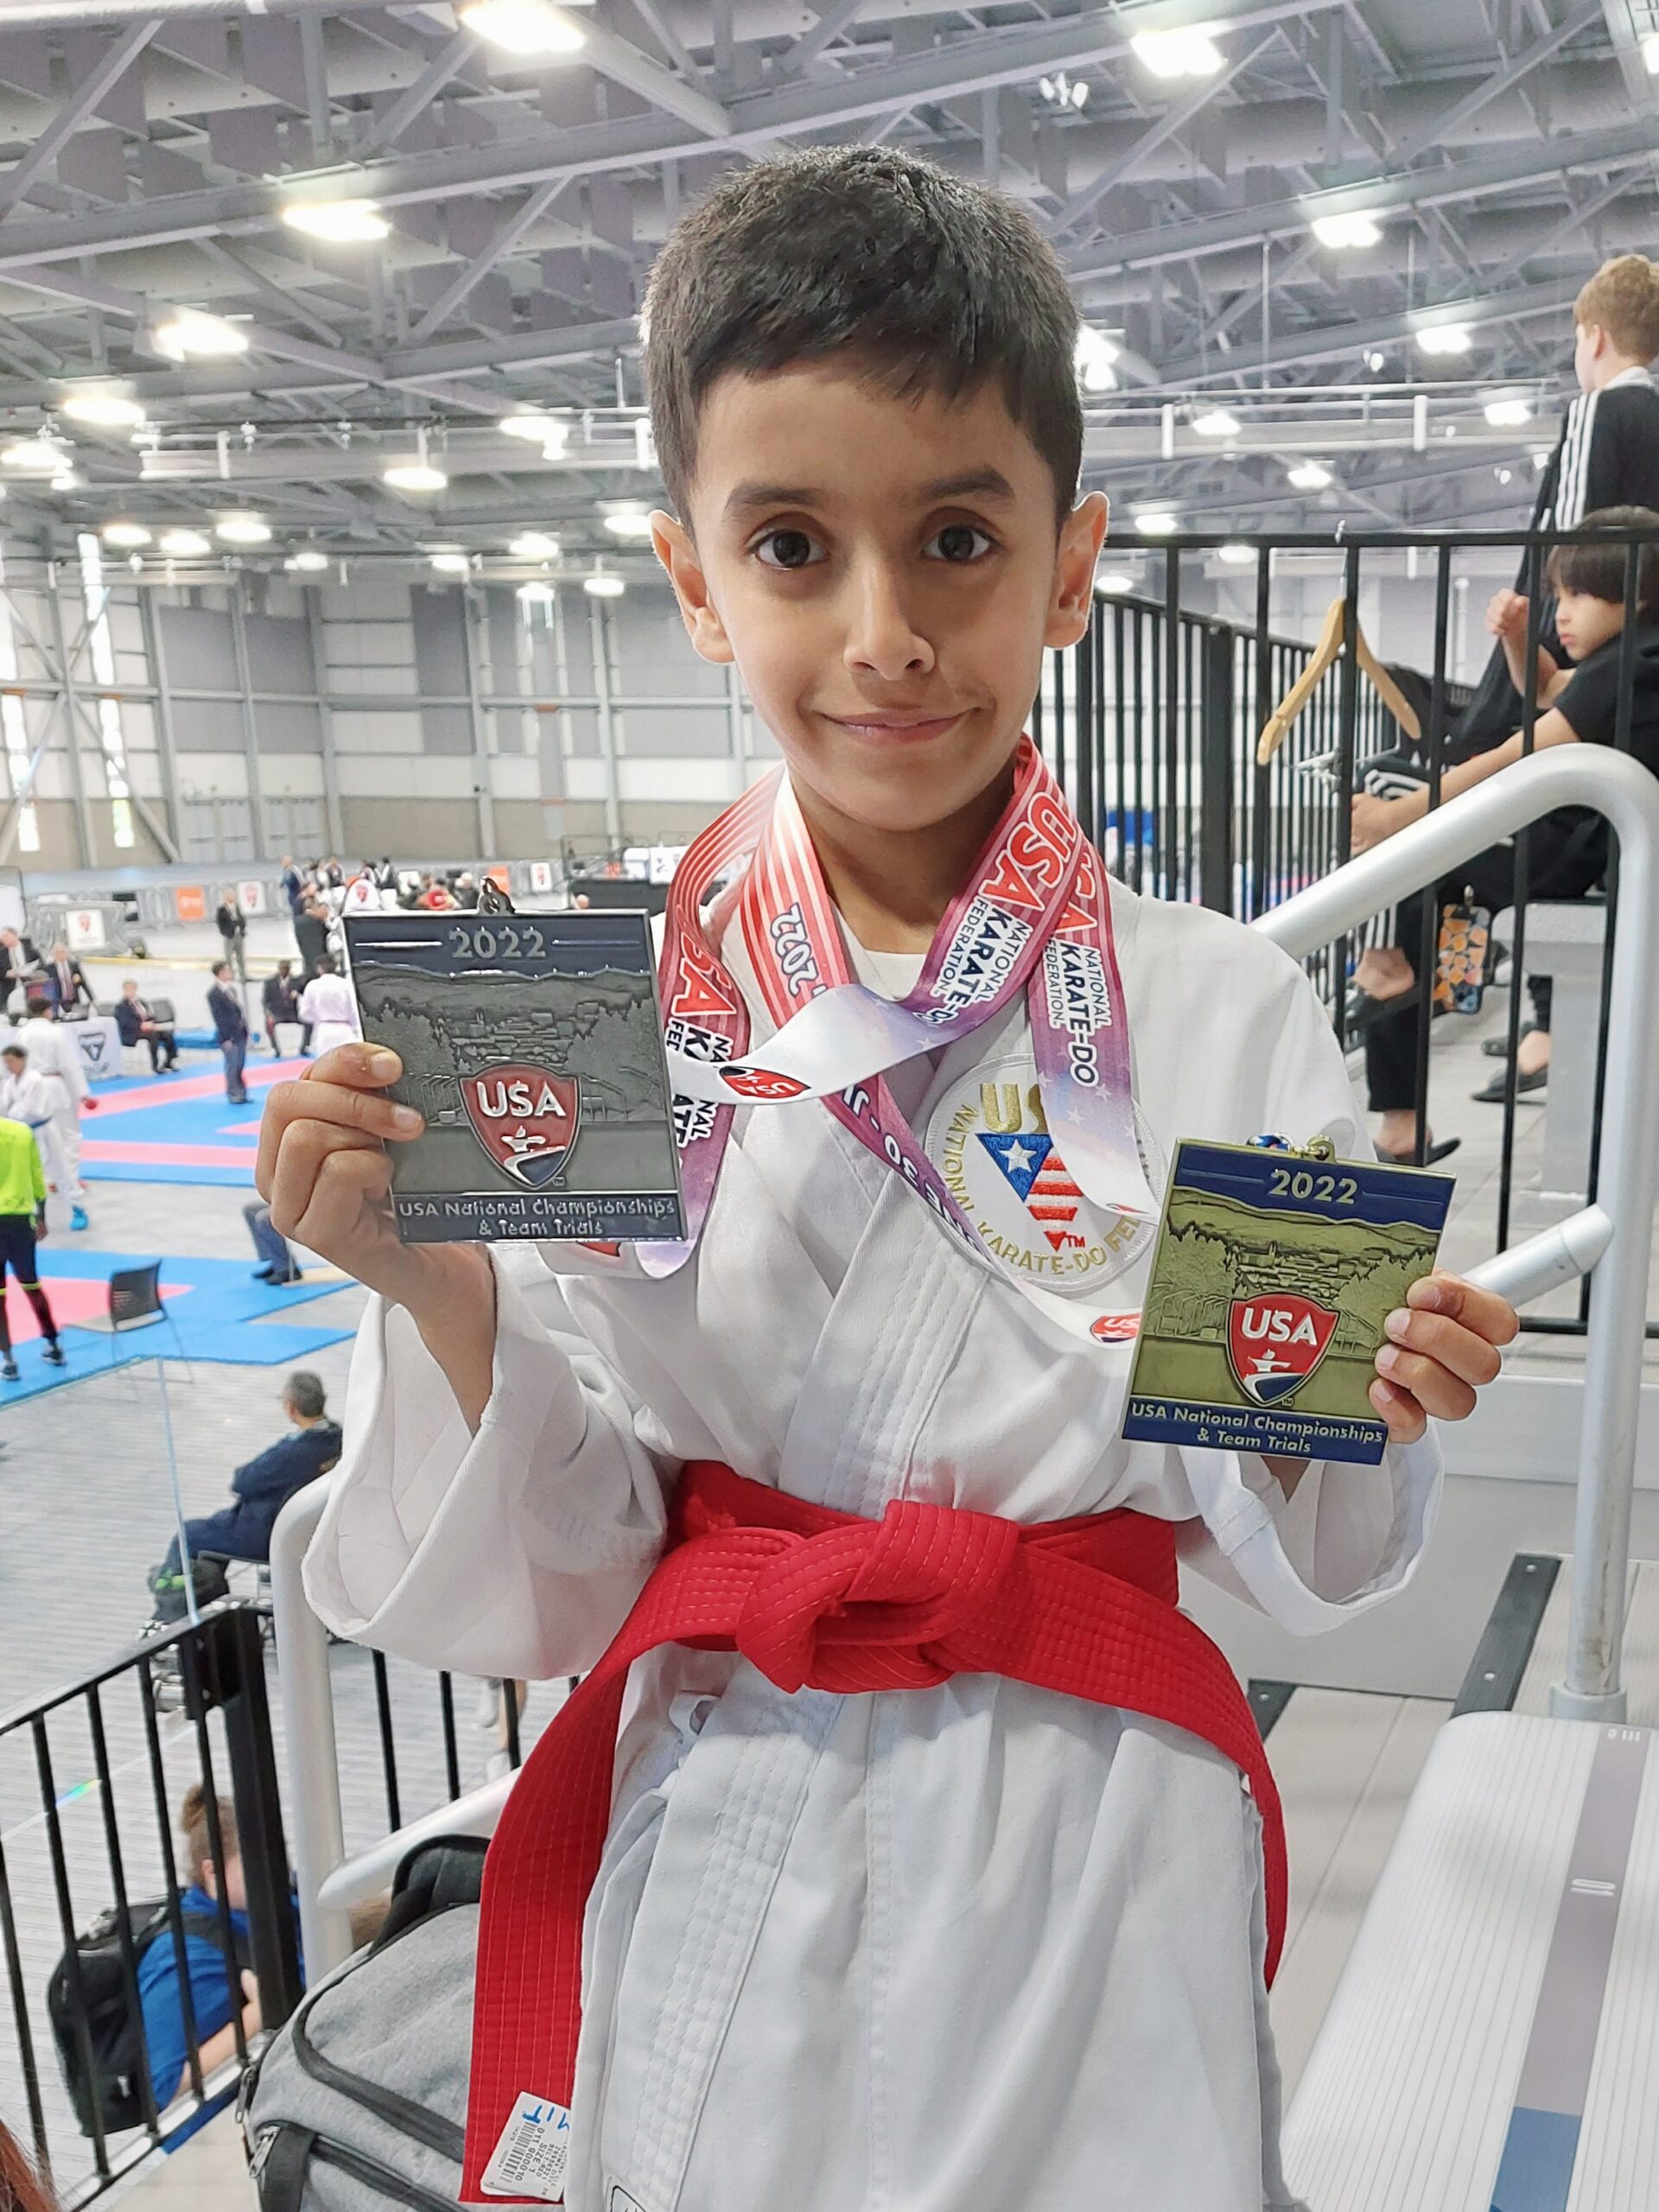 Young Northborough resident wins big at National Karate Championships